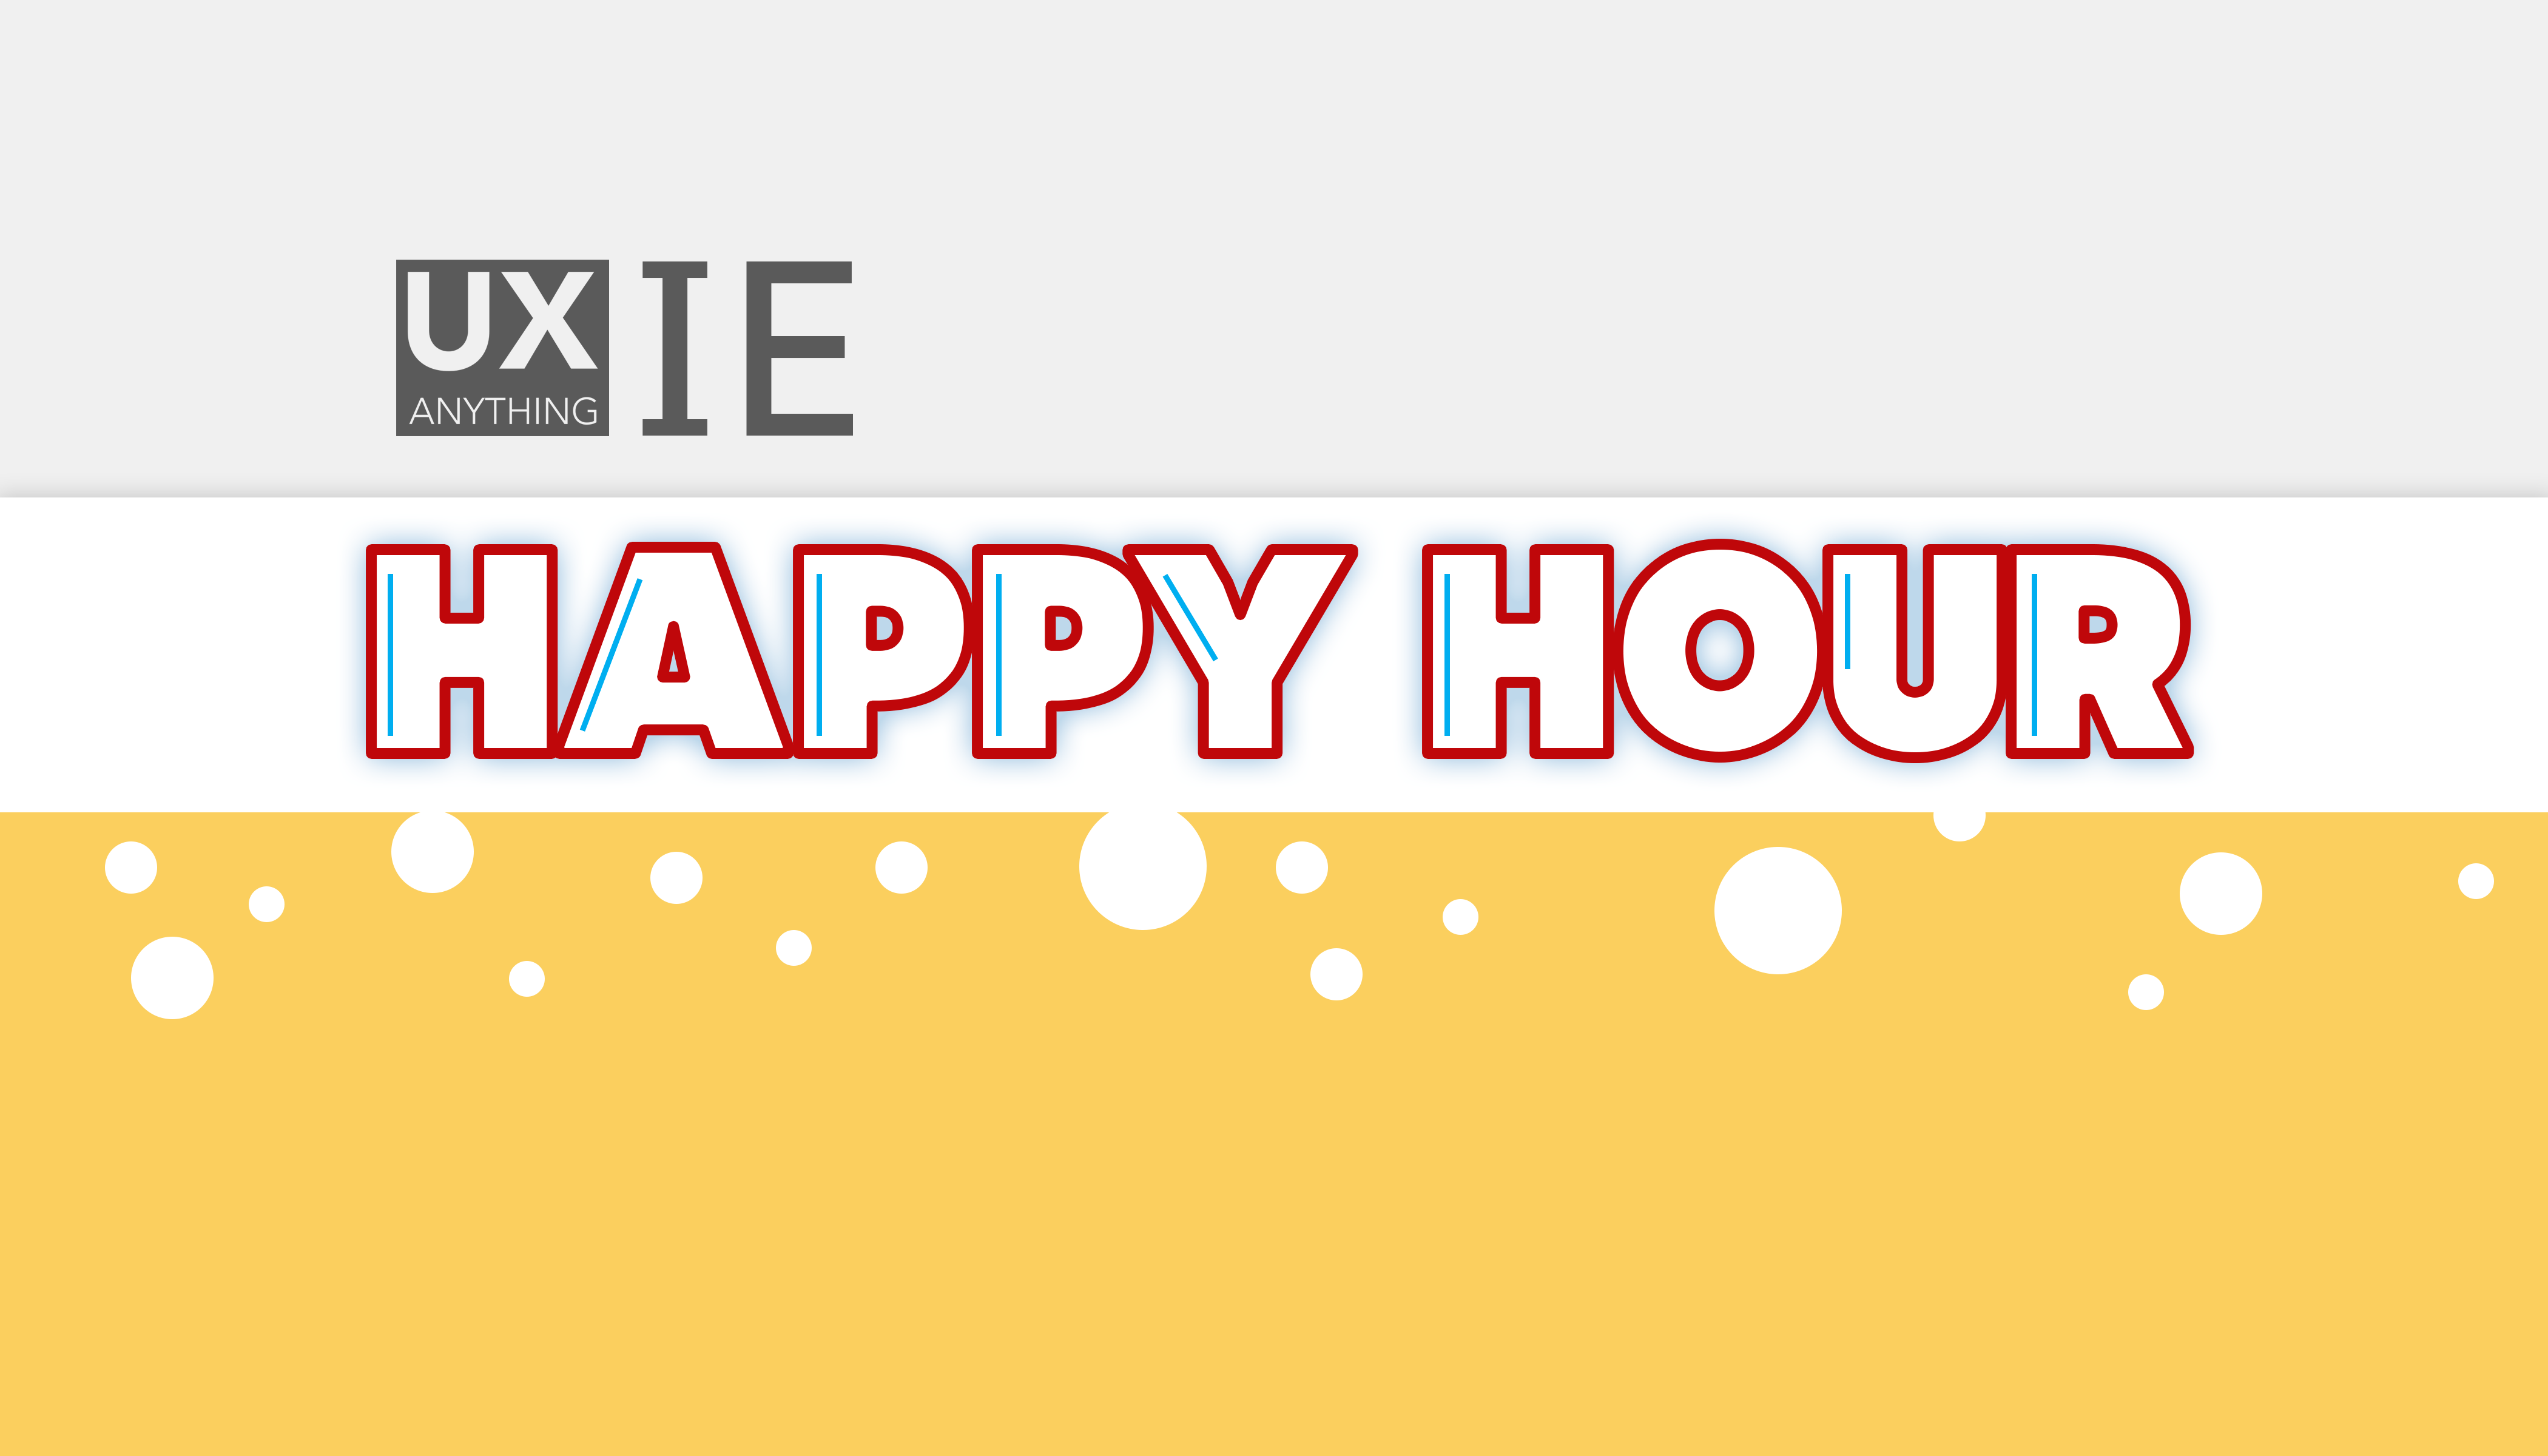 UX Anything Inland Empire - December Happy Hour!